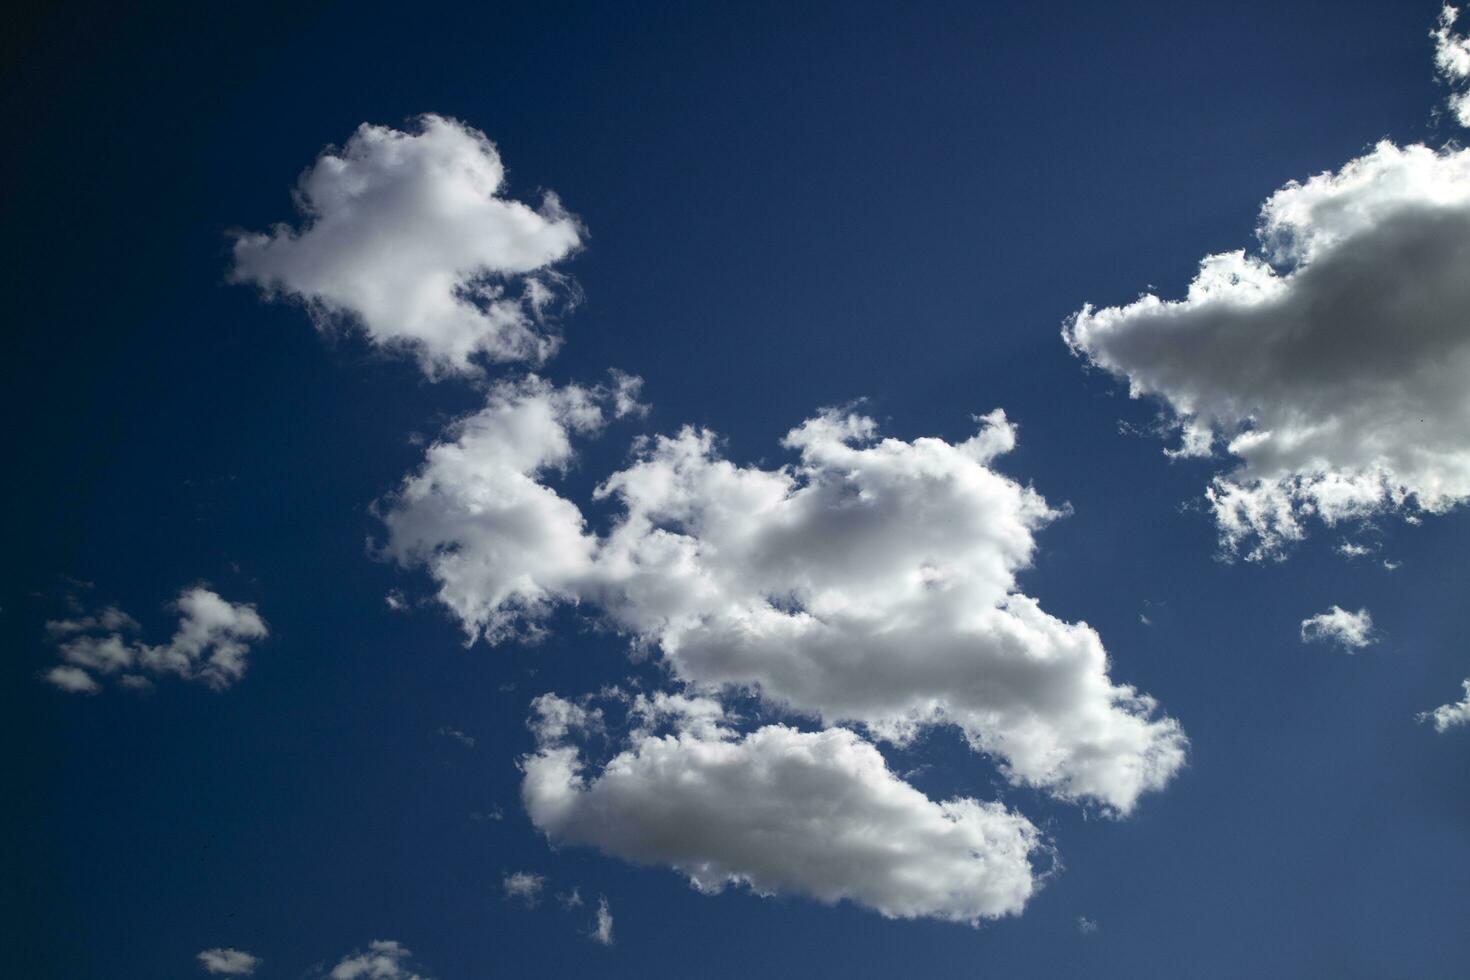 Photographic documentation of some clouds in a blue sky photo